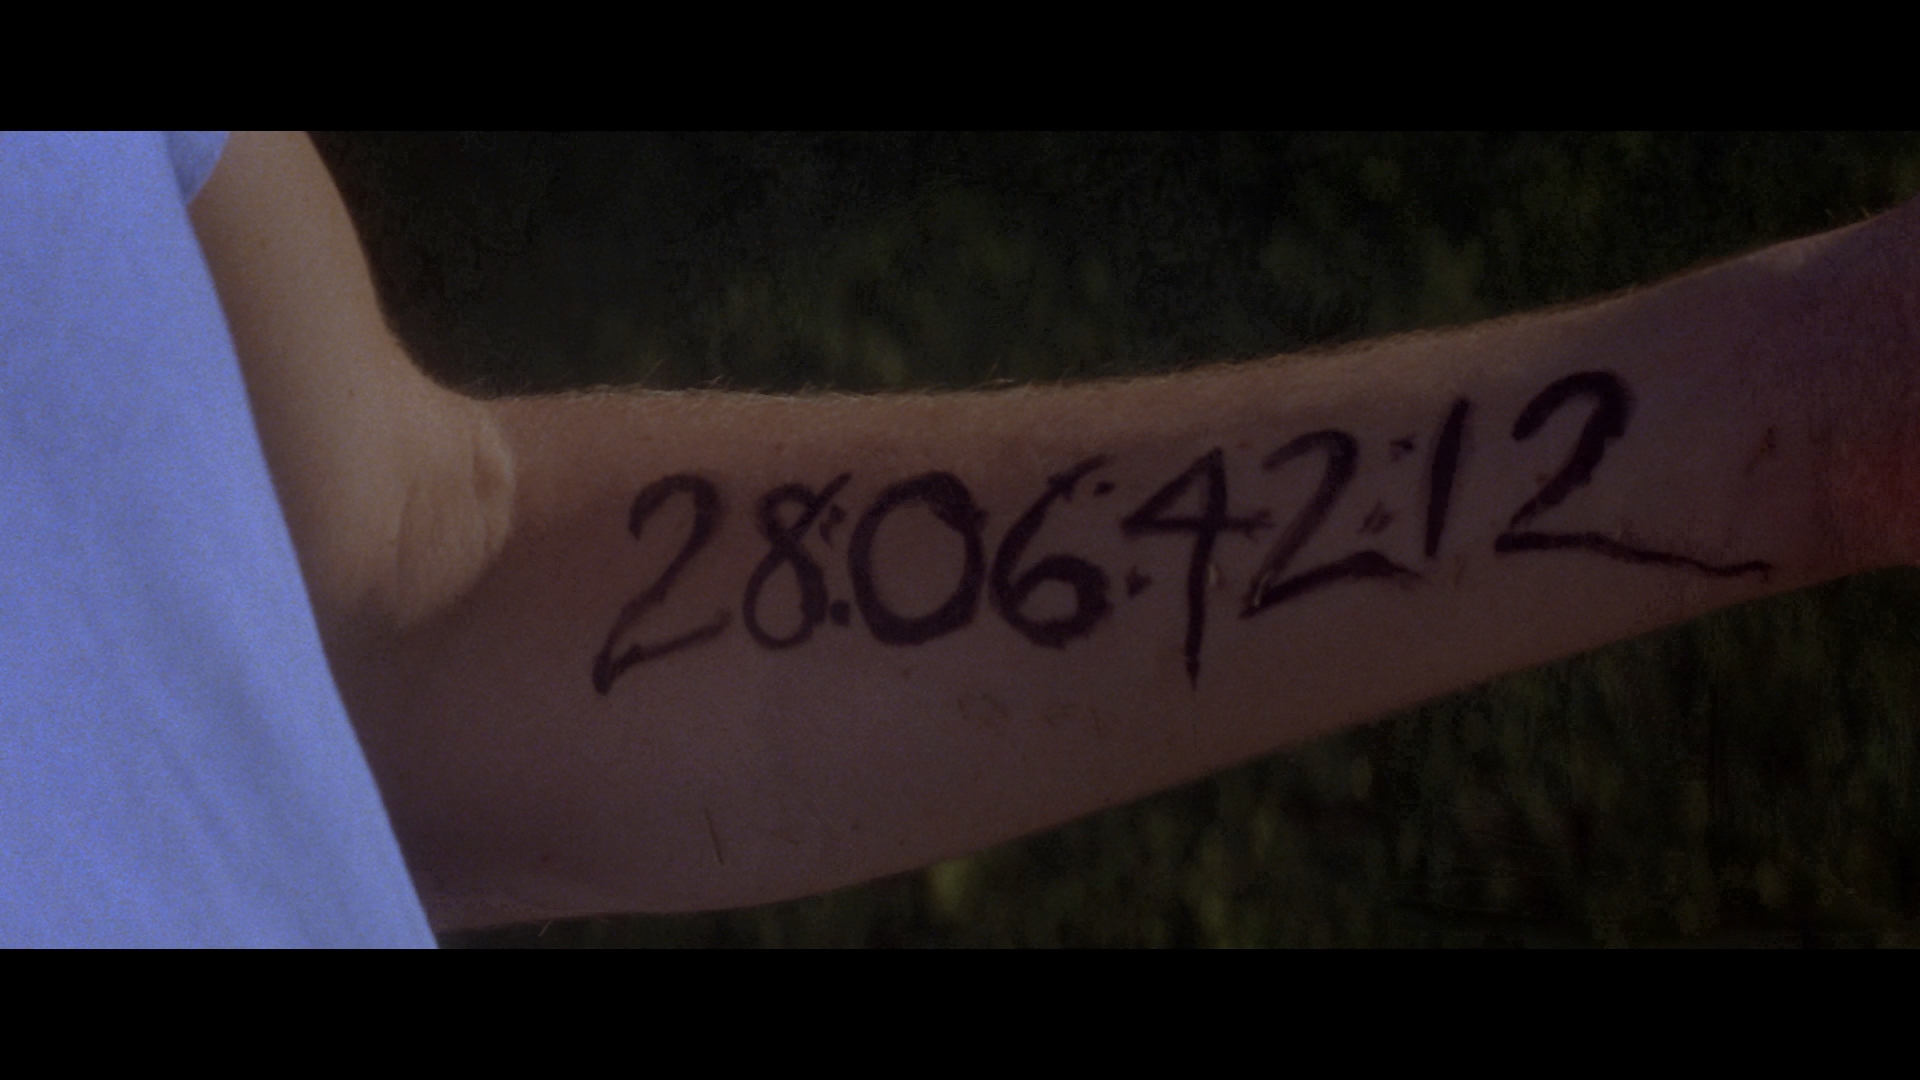 Donnie Darko's visions allow him to discover when the world will end.